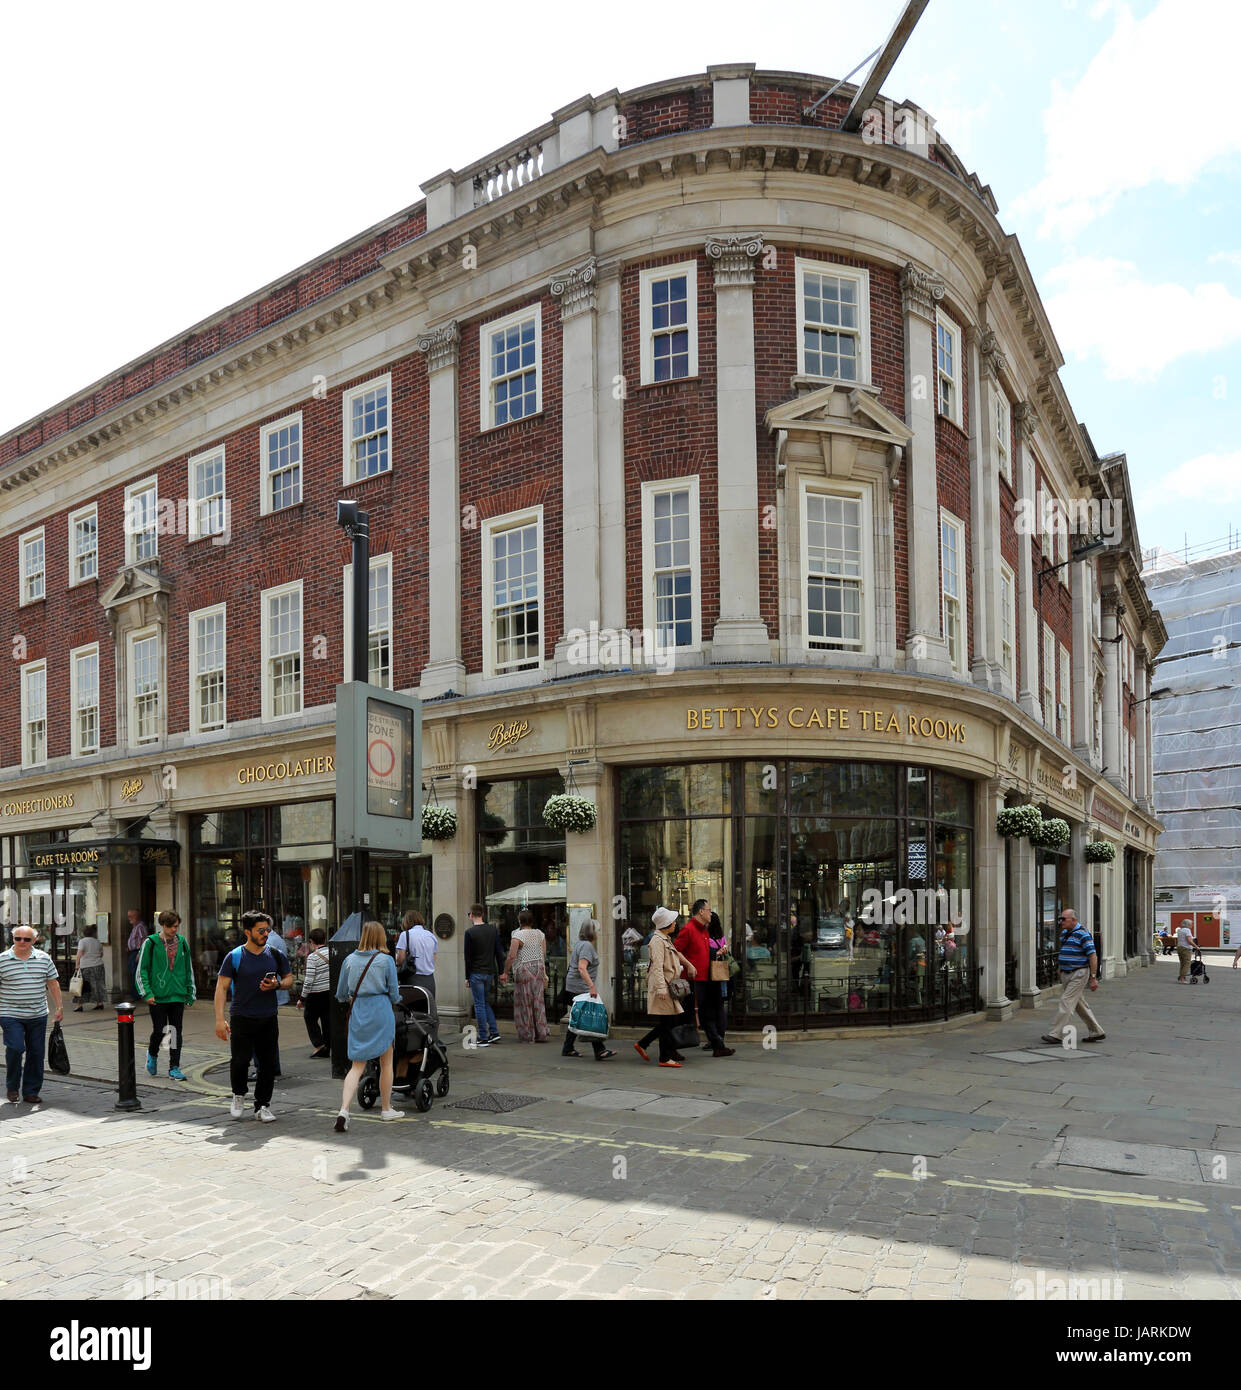 Bettys cafe and tea rooms in York, UK Stock Photo